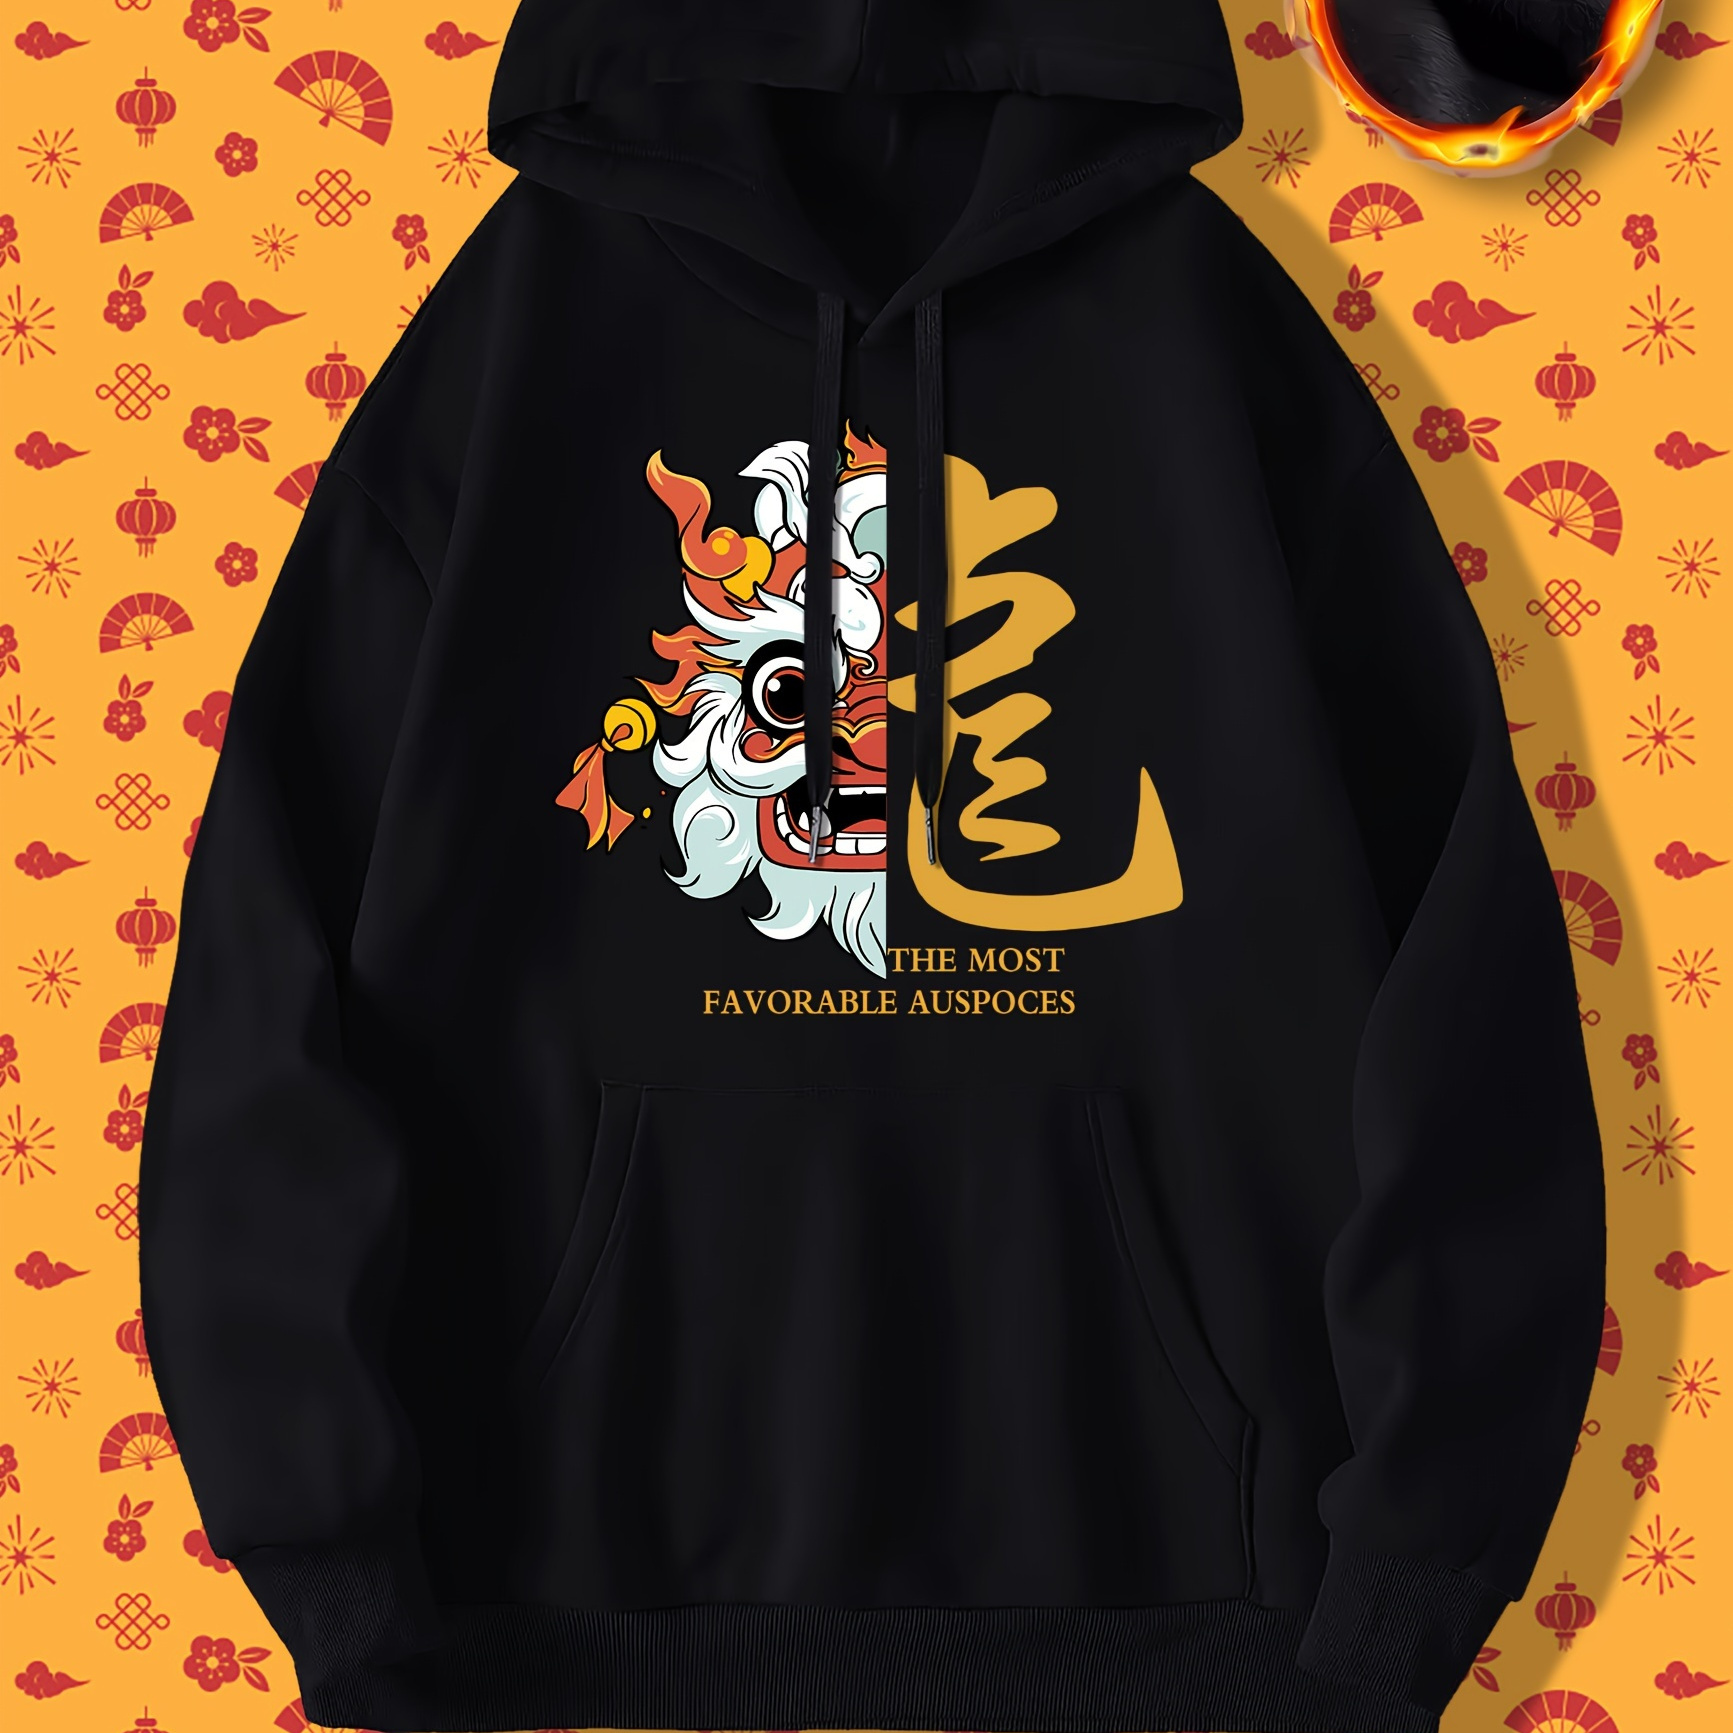 

Chinese Cartoon Dragon And Character Graphic Print Hoodie With Fleece, Men's Creative Design Hooded Pullover, Warm Long Sleeve Sweatshirt For Men With Kangaroo Pocket For Fall And Winter, As Gifts